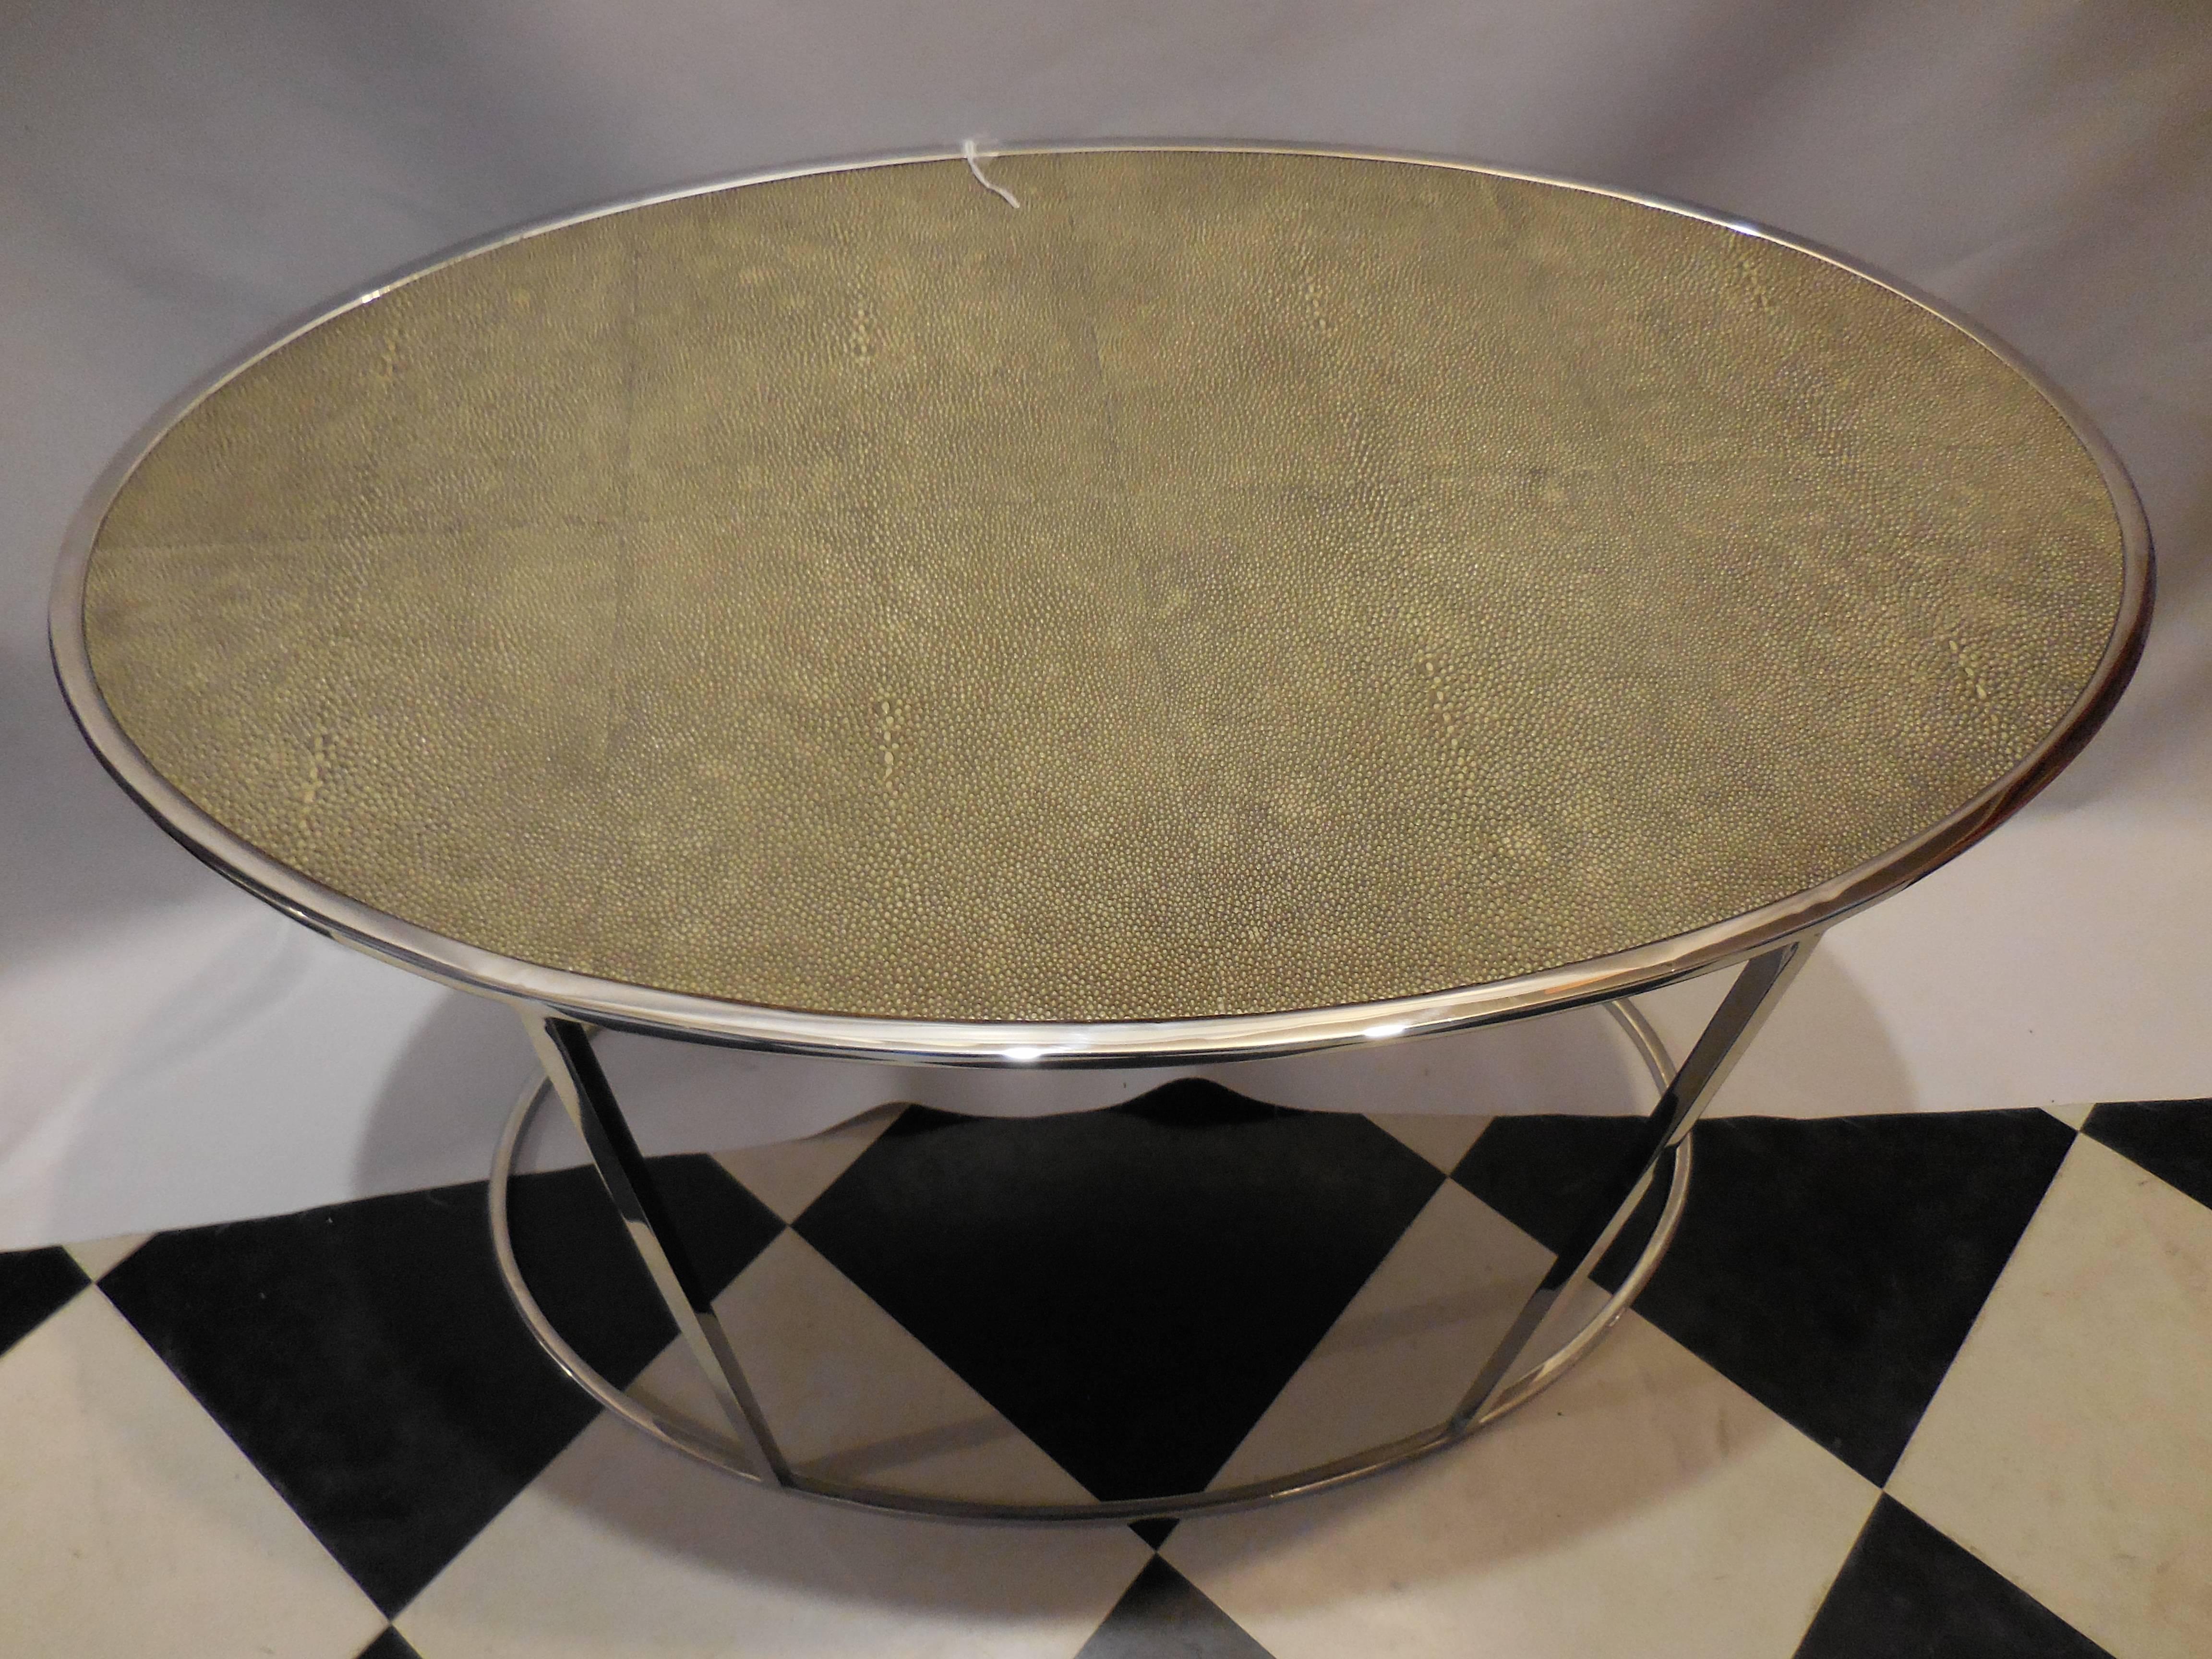 Modern oval Theodore Alexander shagreen top table. In excellent condition, circa 1999. Founded in 1996 by the enigmatic Paul Maitland Smith, an industry legend who has pioneered high end furniture production throughout Asia for the past 25 years,